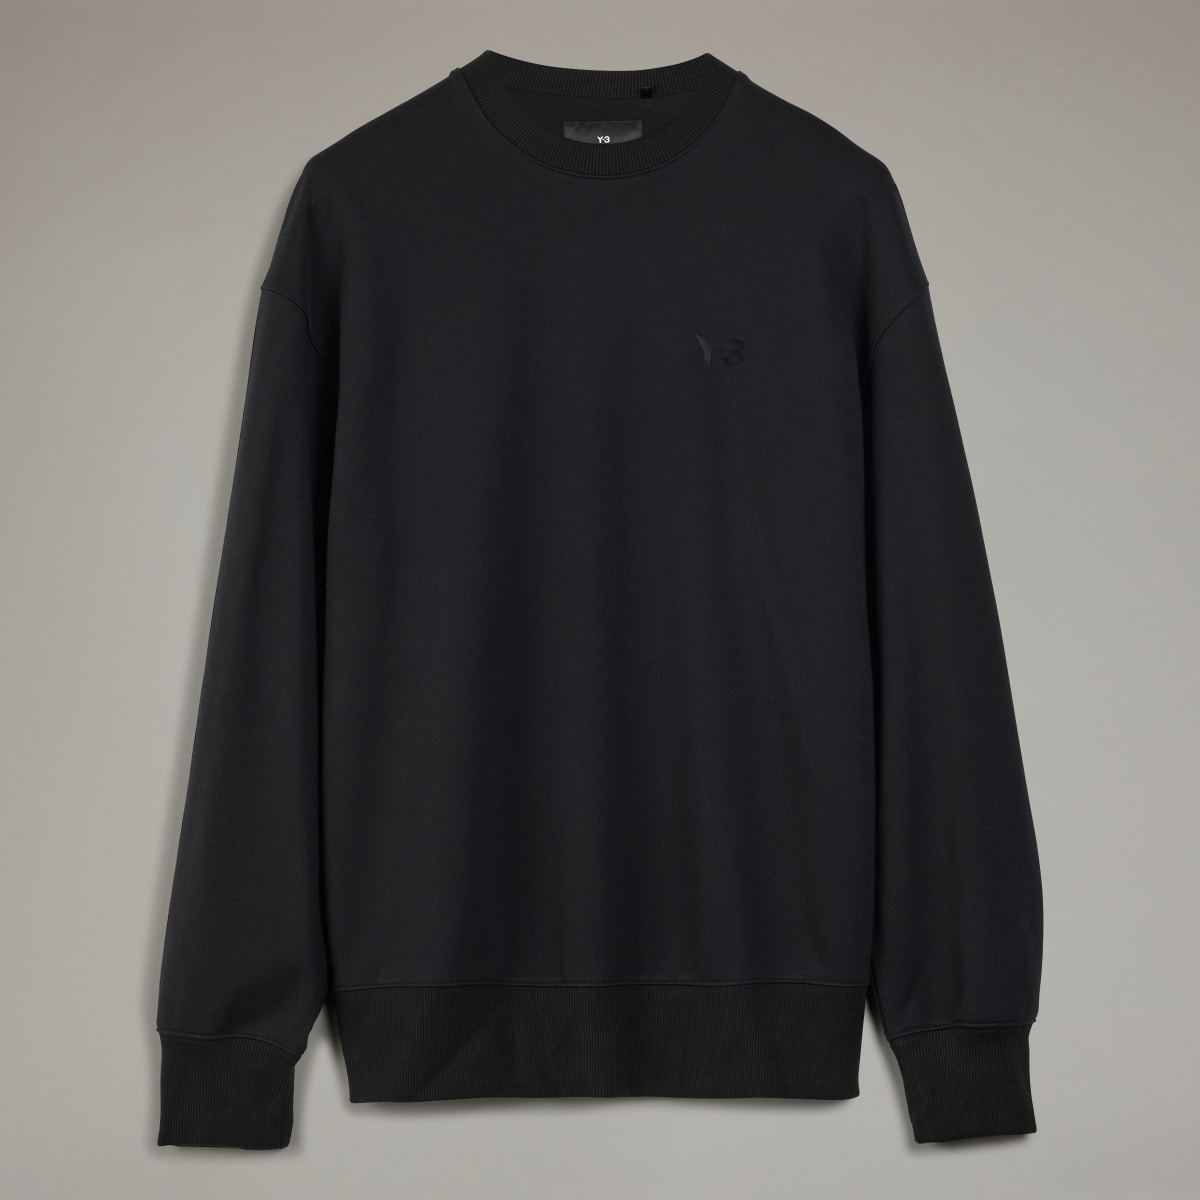 Adidas Y-3 French Terry Crew Sweater. 6